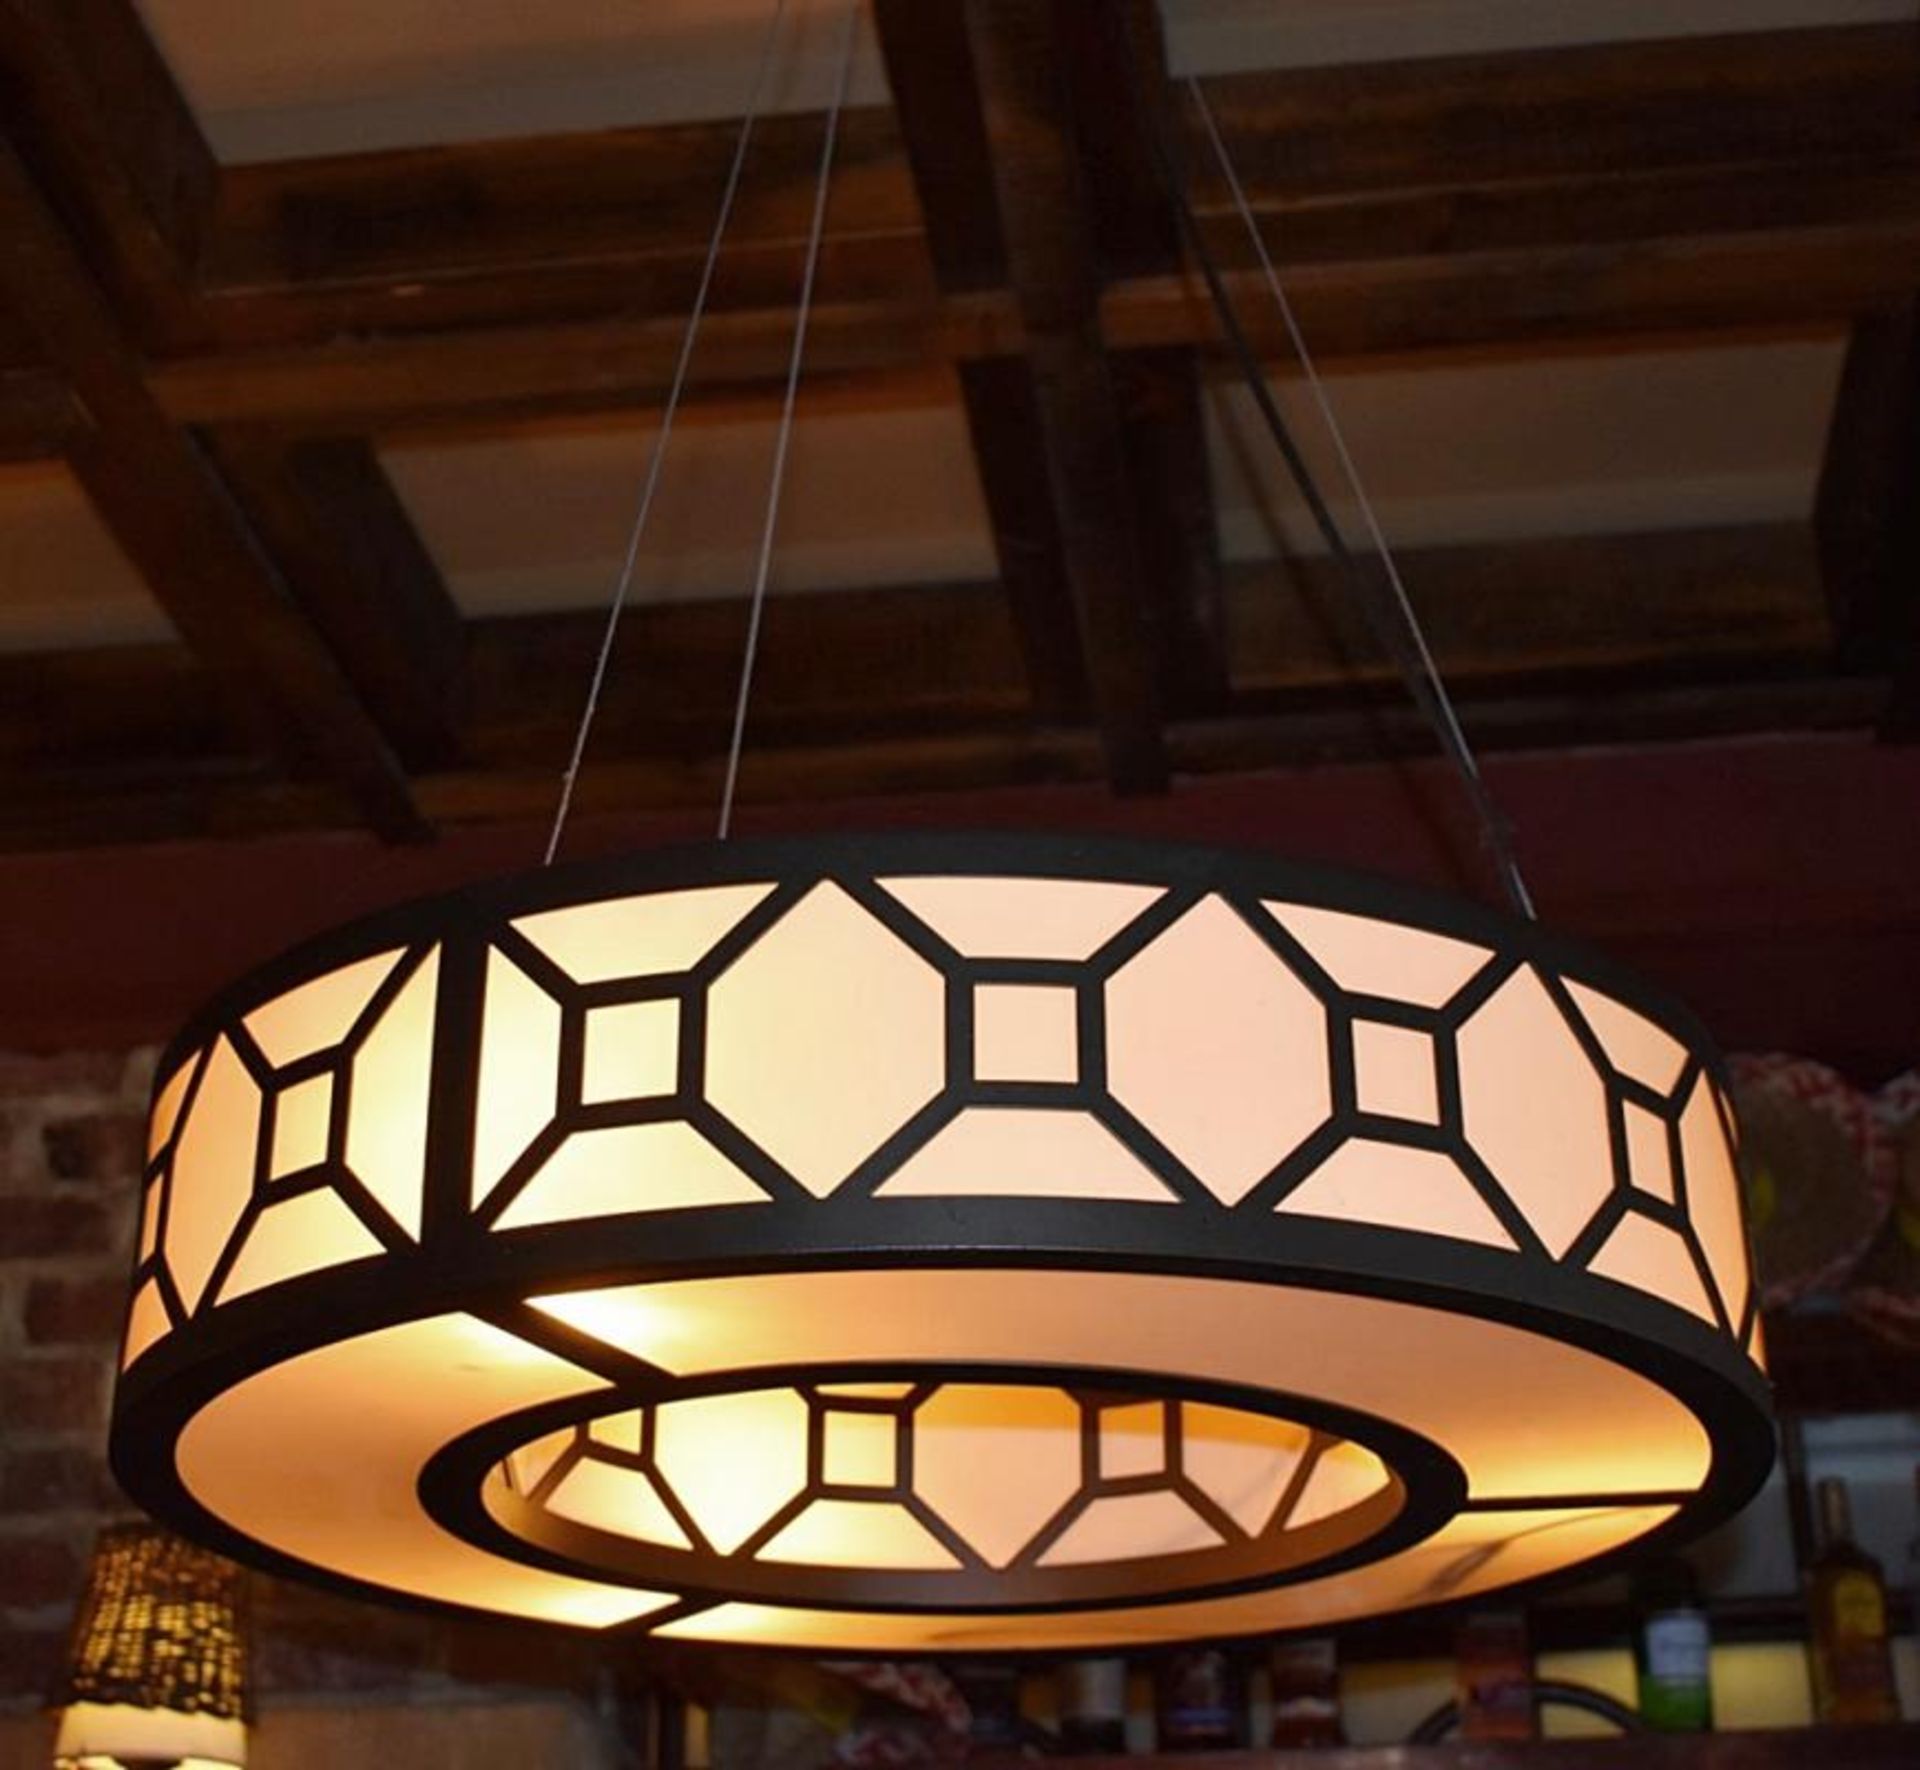 1 x Large Round Suspended Commercial Ceiling Light Fitting Featuring A Leaded Glass Style Shade - Di - Image 3 of 3